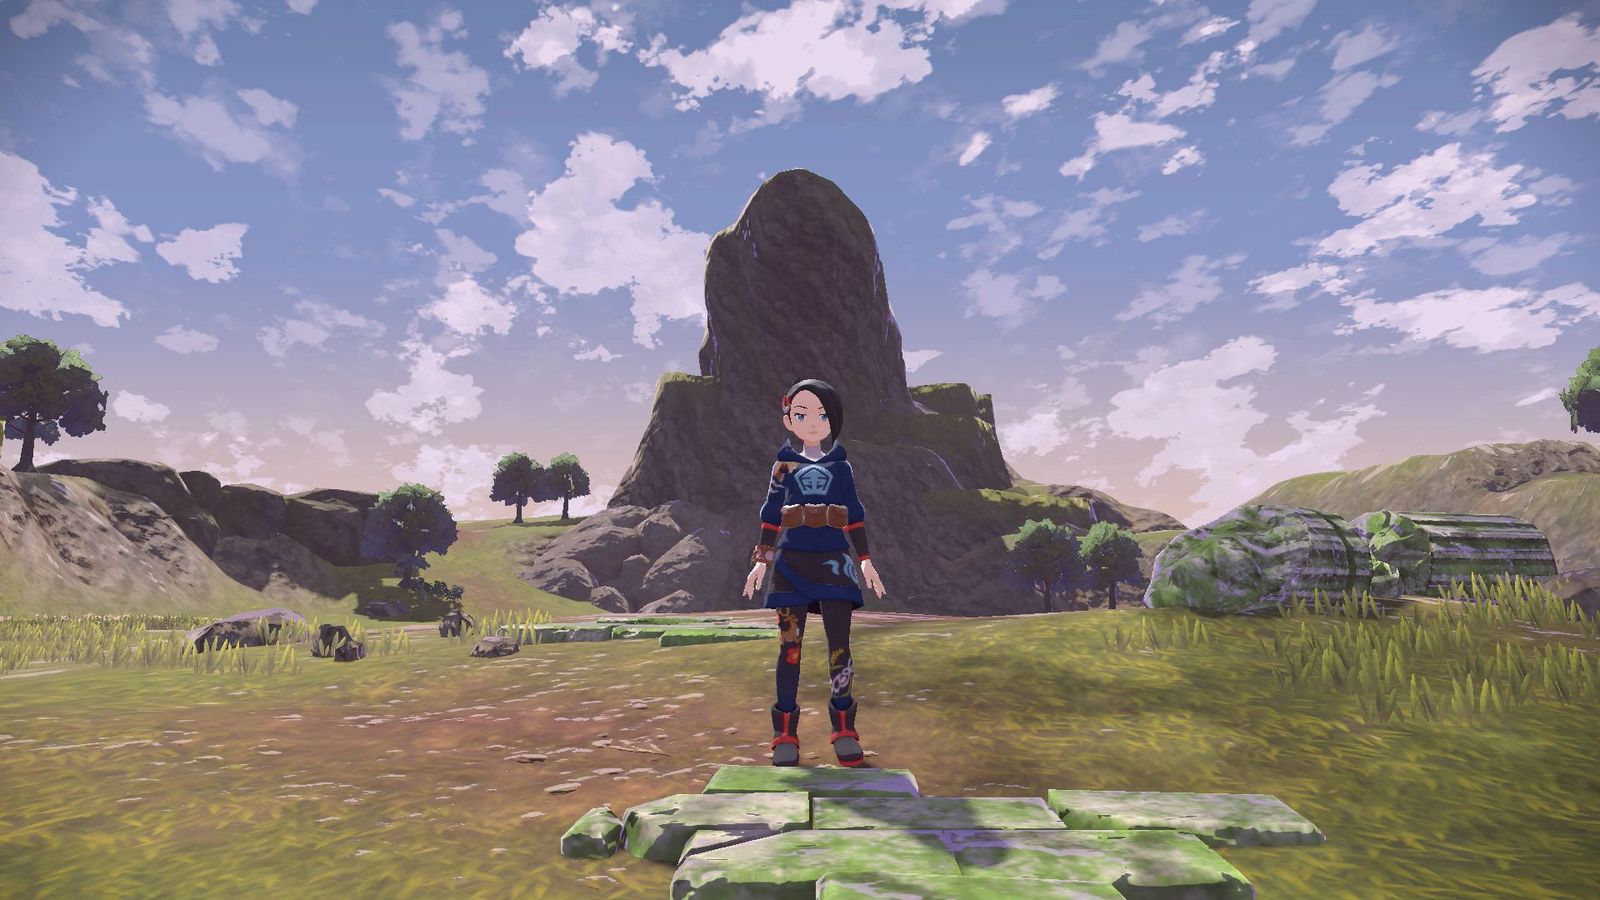 A Pokémon Trainer in one of the open-world areas of Pokémon Legends: Arceus.